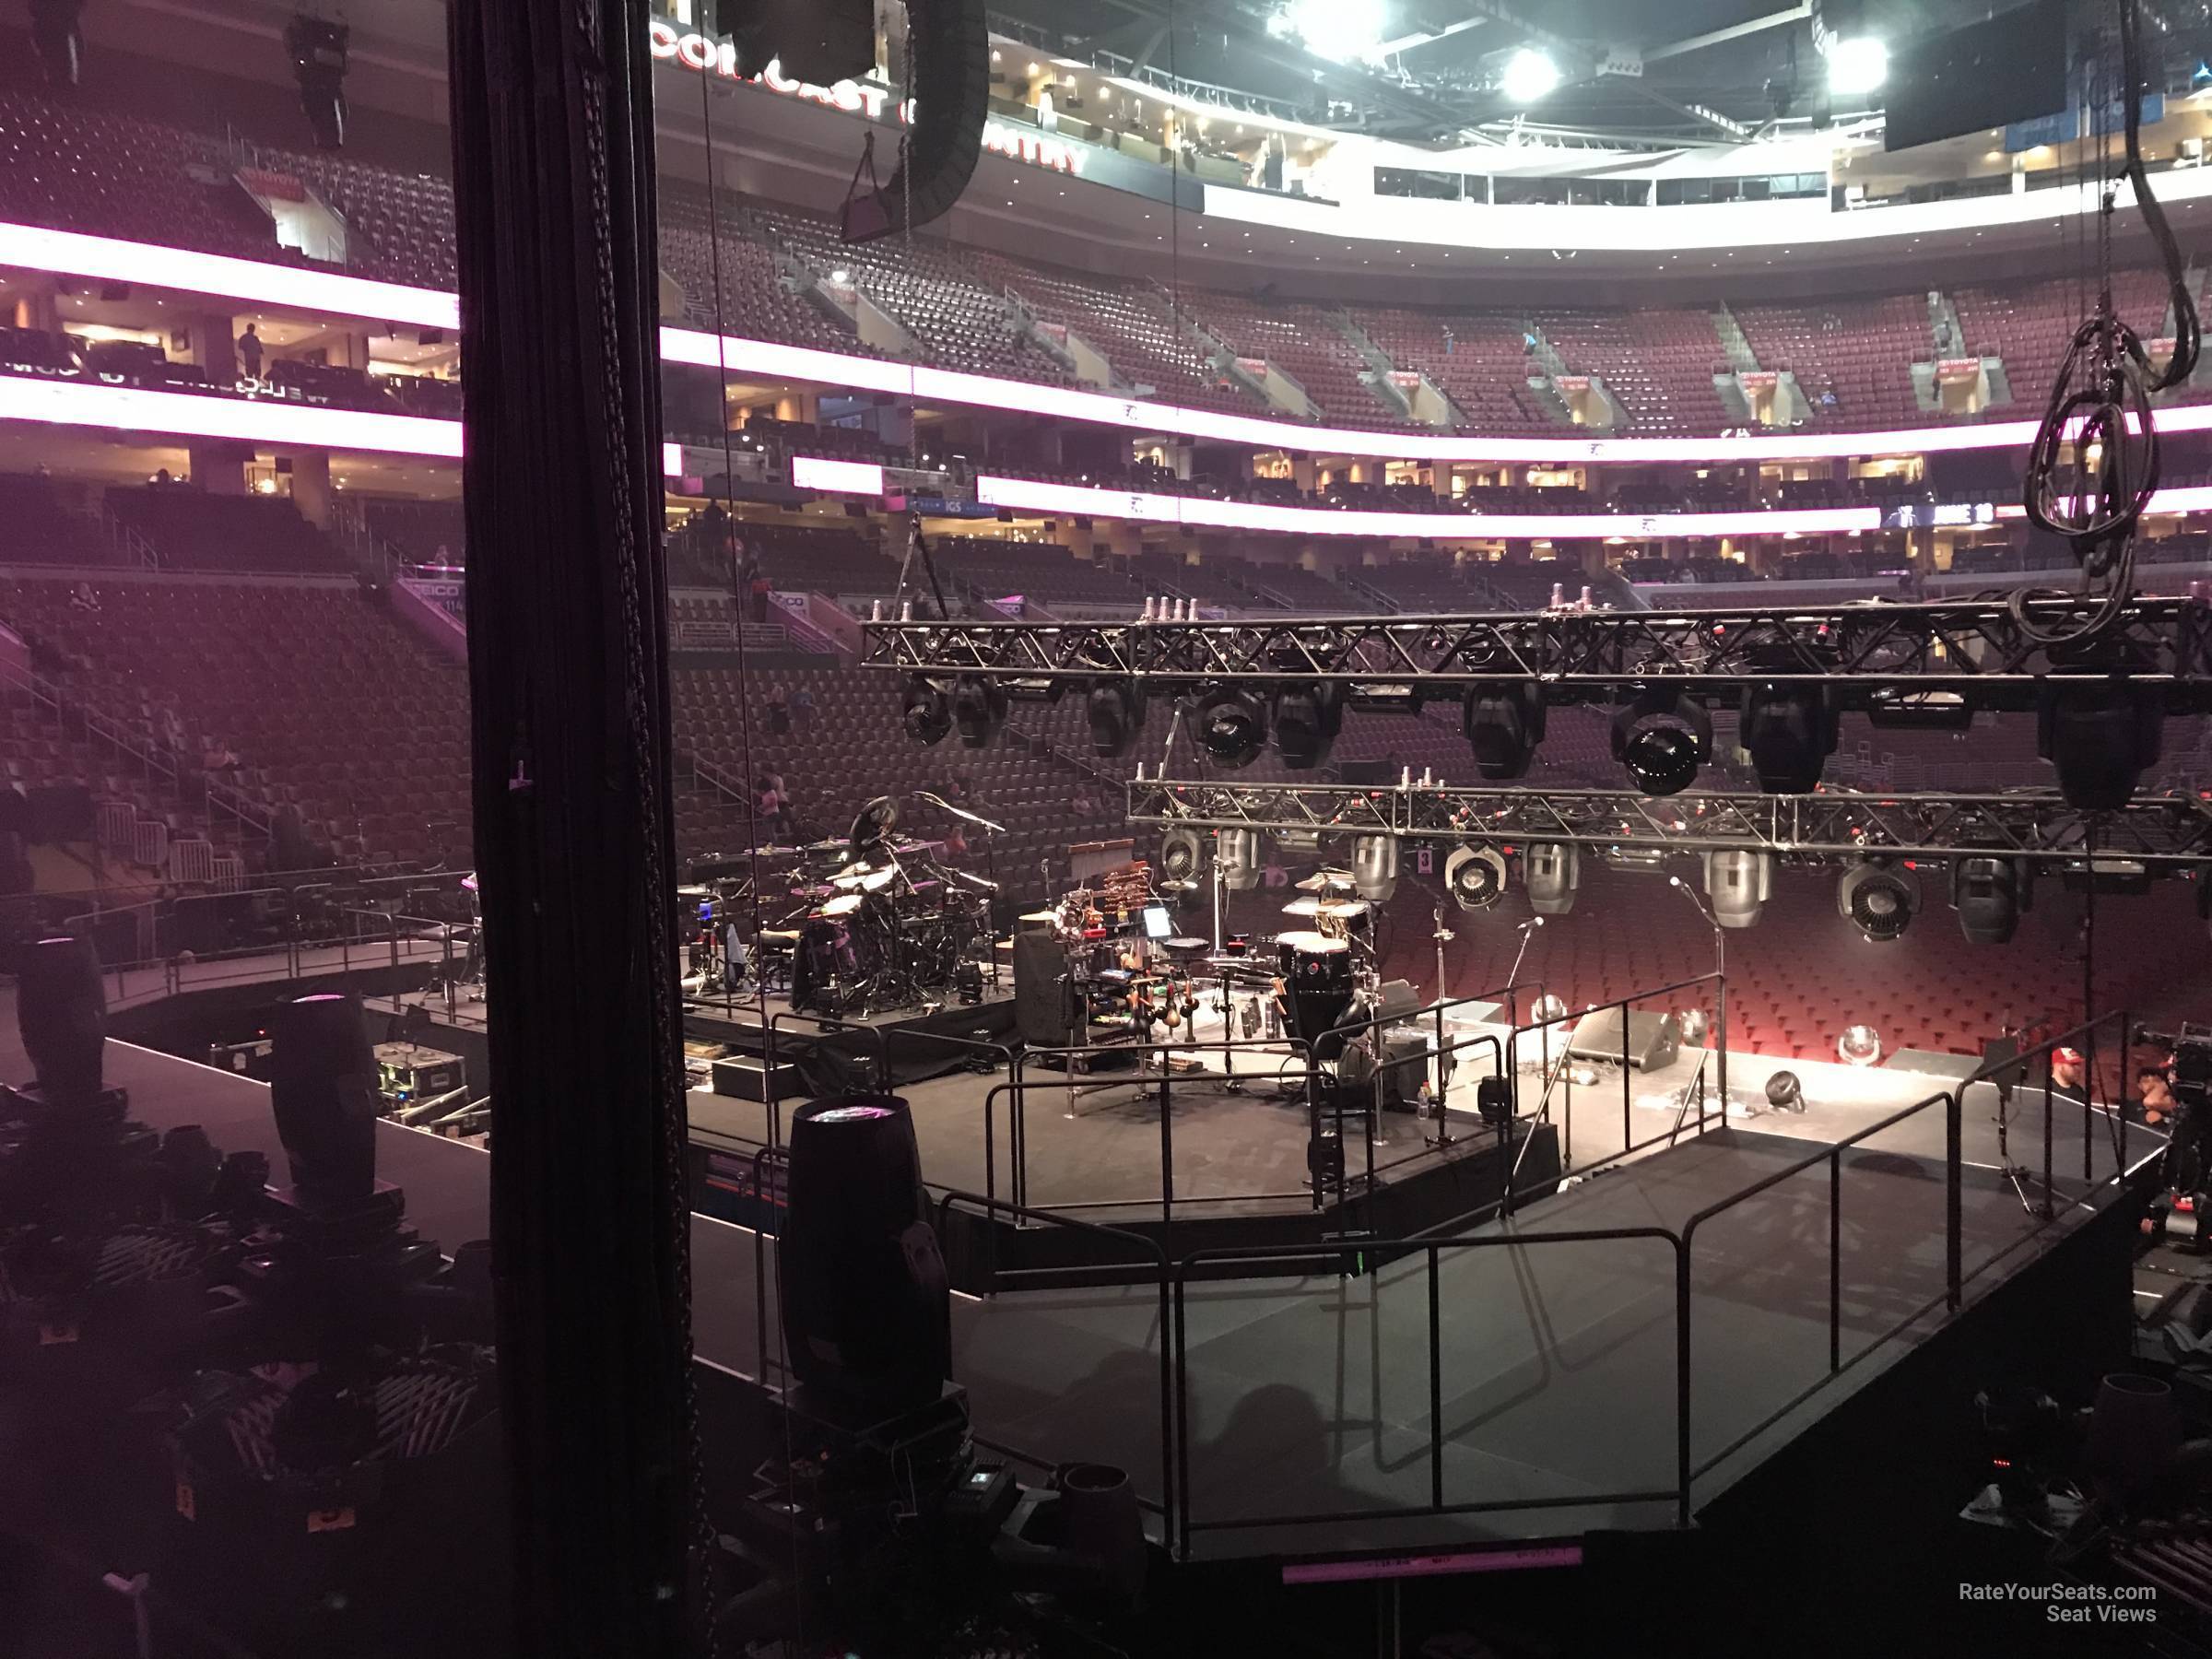 section 120, row 8 seat view  for concert - wells fargo center